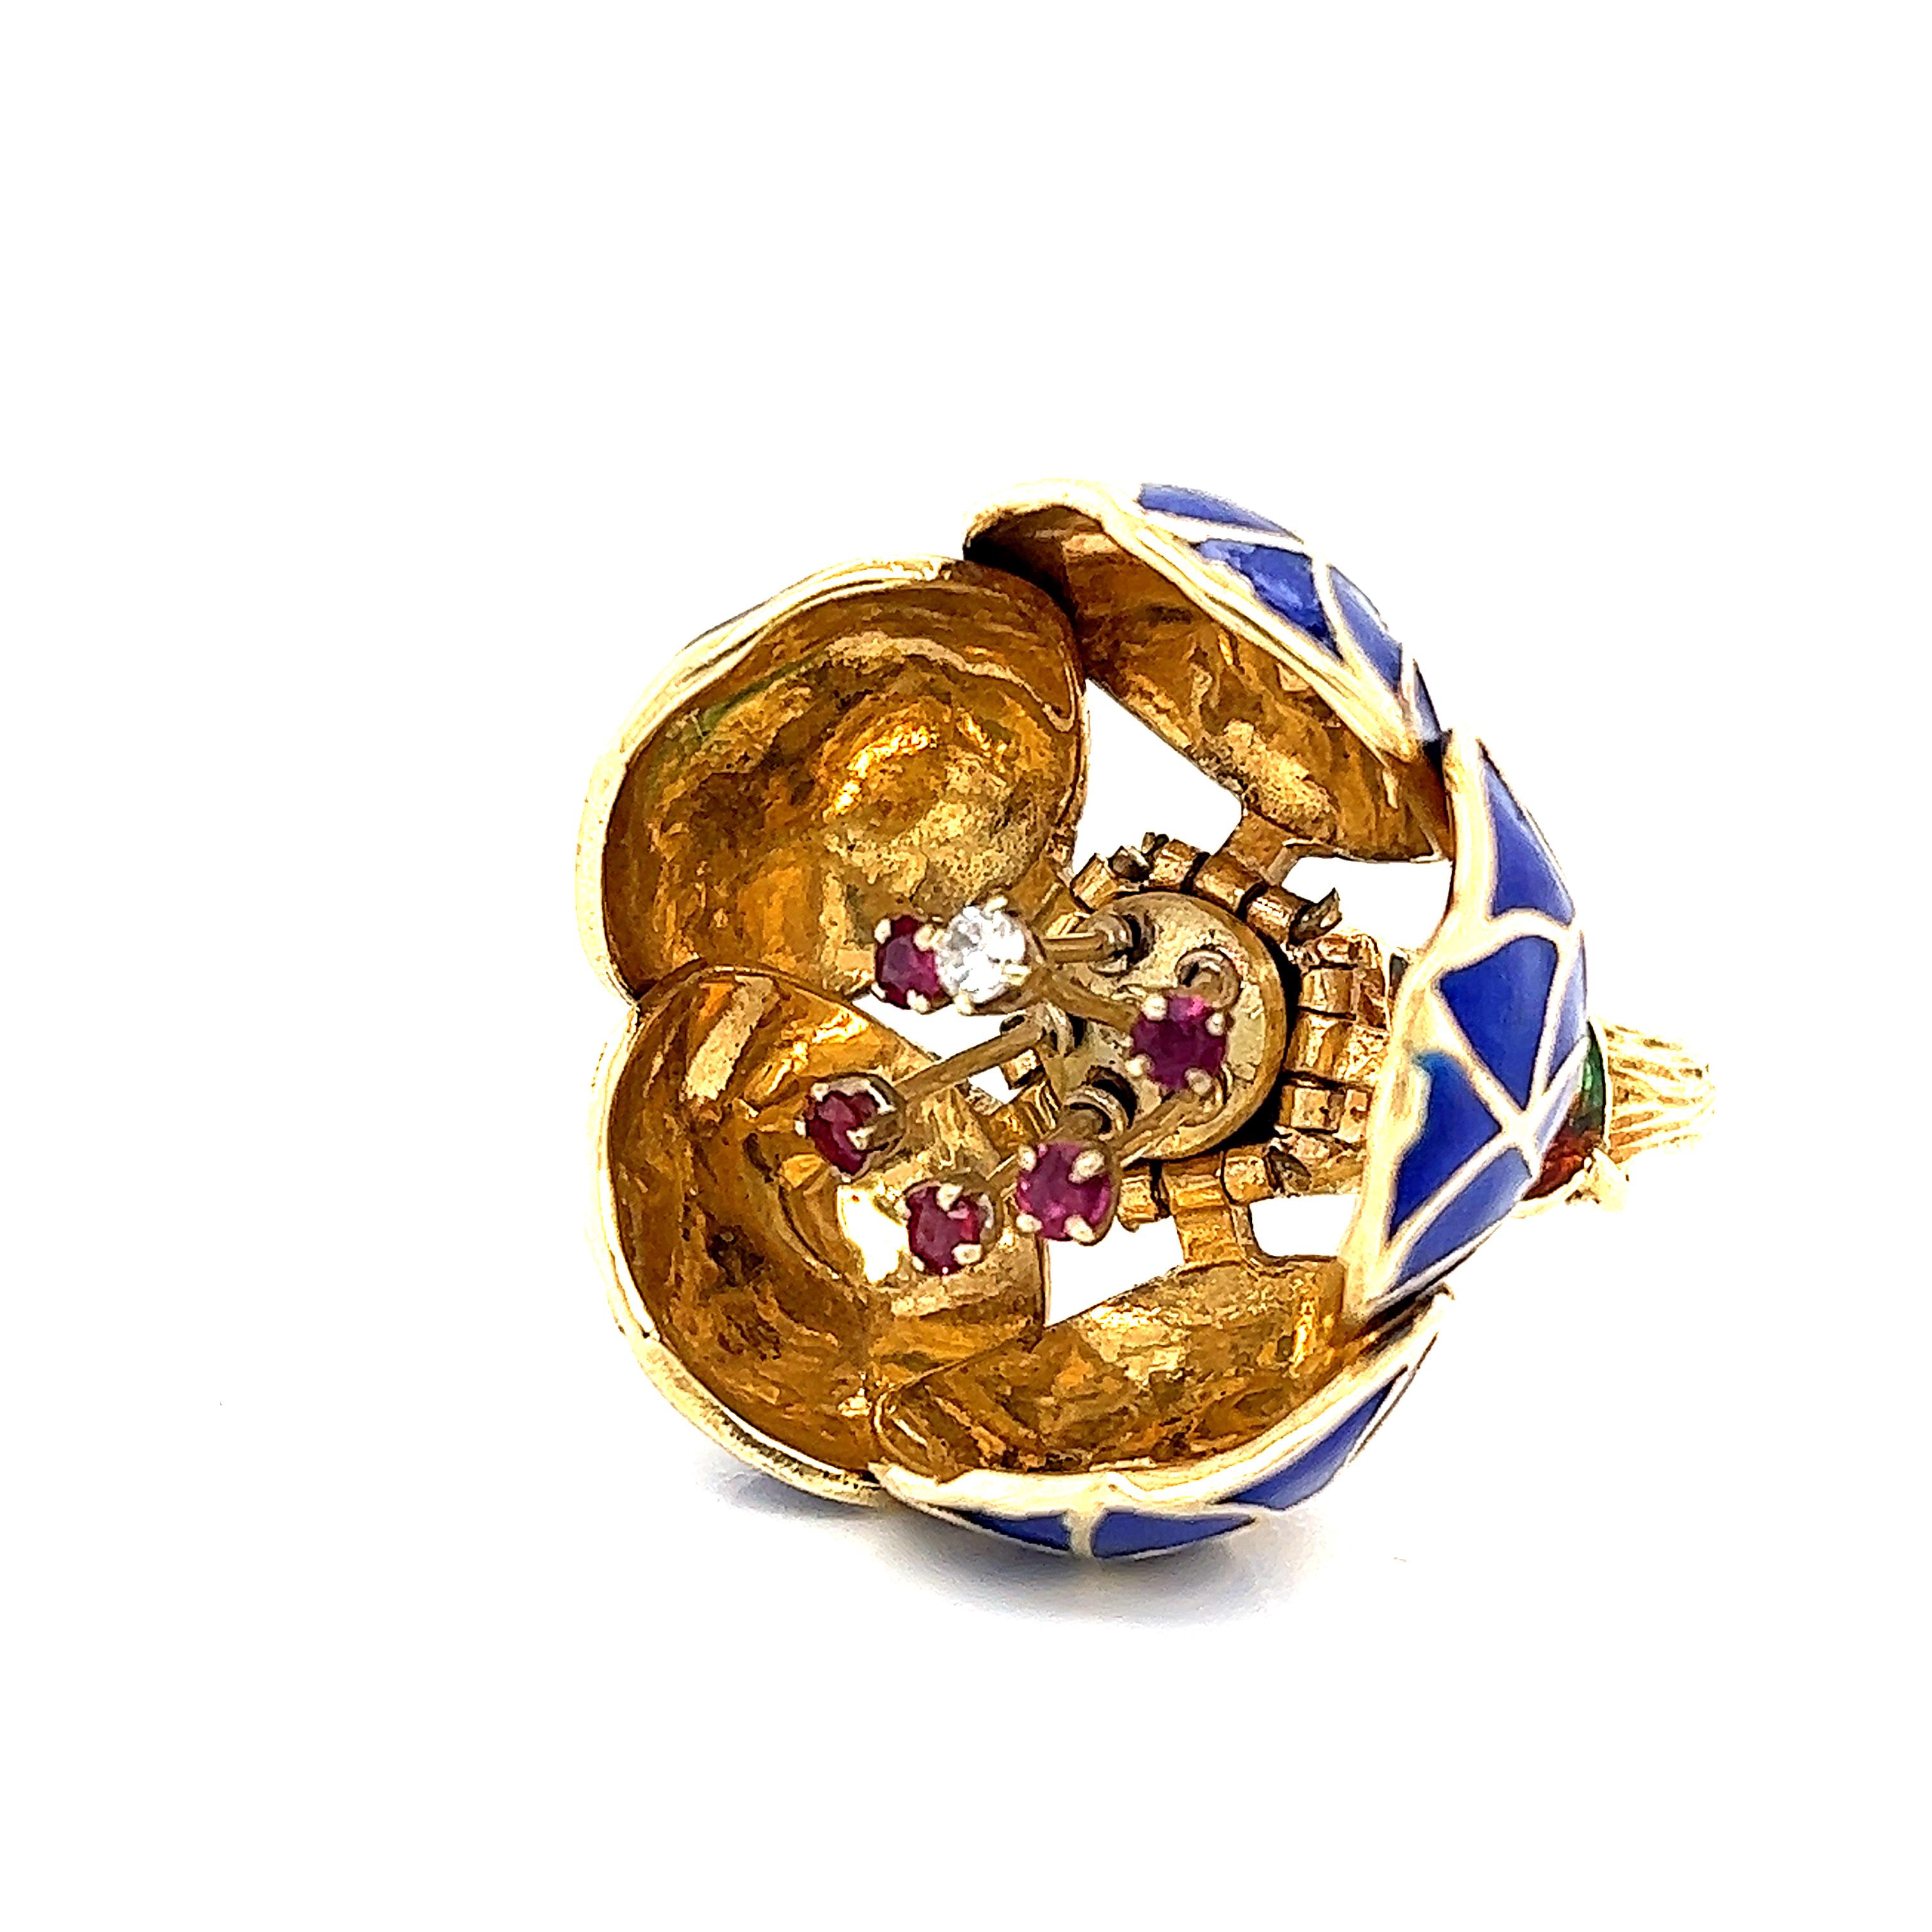 Gorgeous floral design crafted in 15k yellow gold. This amazing ring has two different styles it can be worn as. The ring rests as a closed flower with blue enamel decorating the petals. The ring is functional as it opens up to show a flower in full